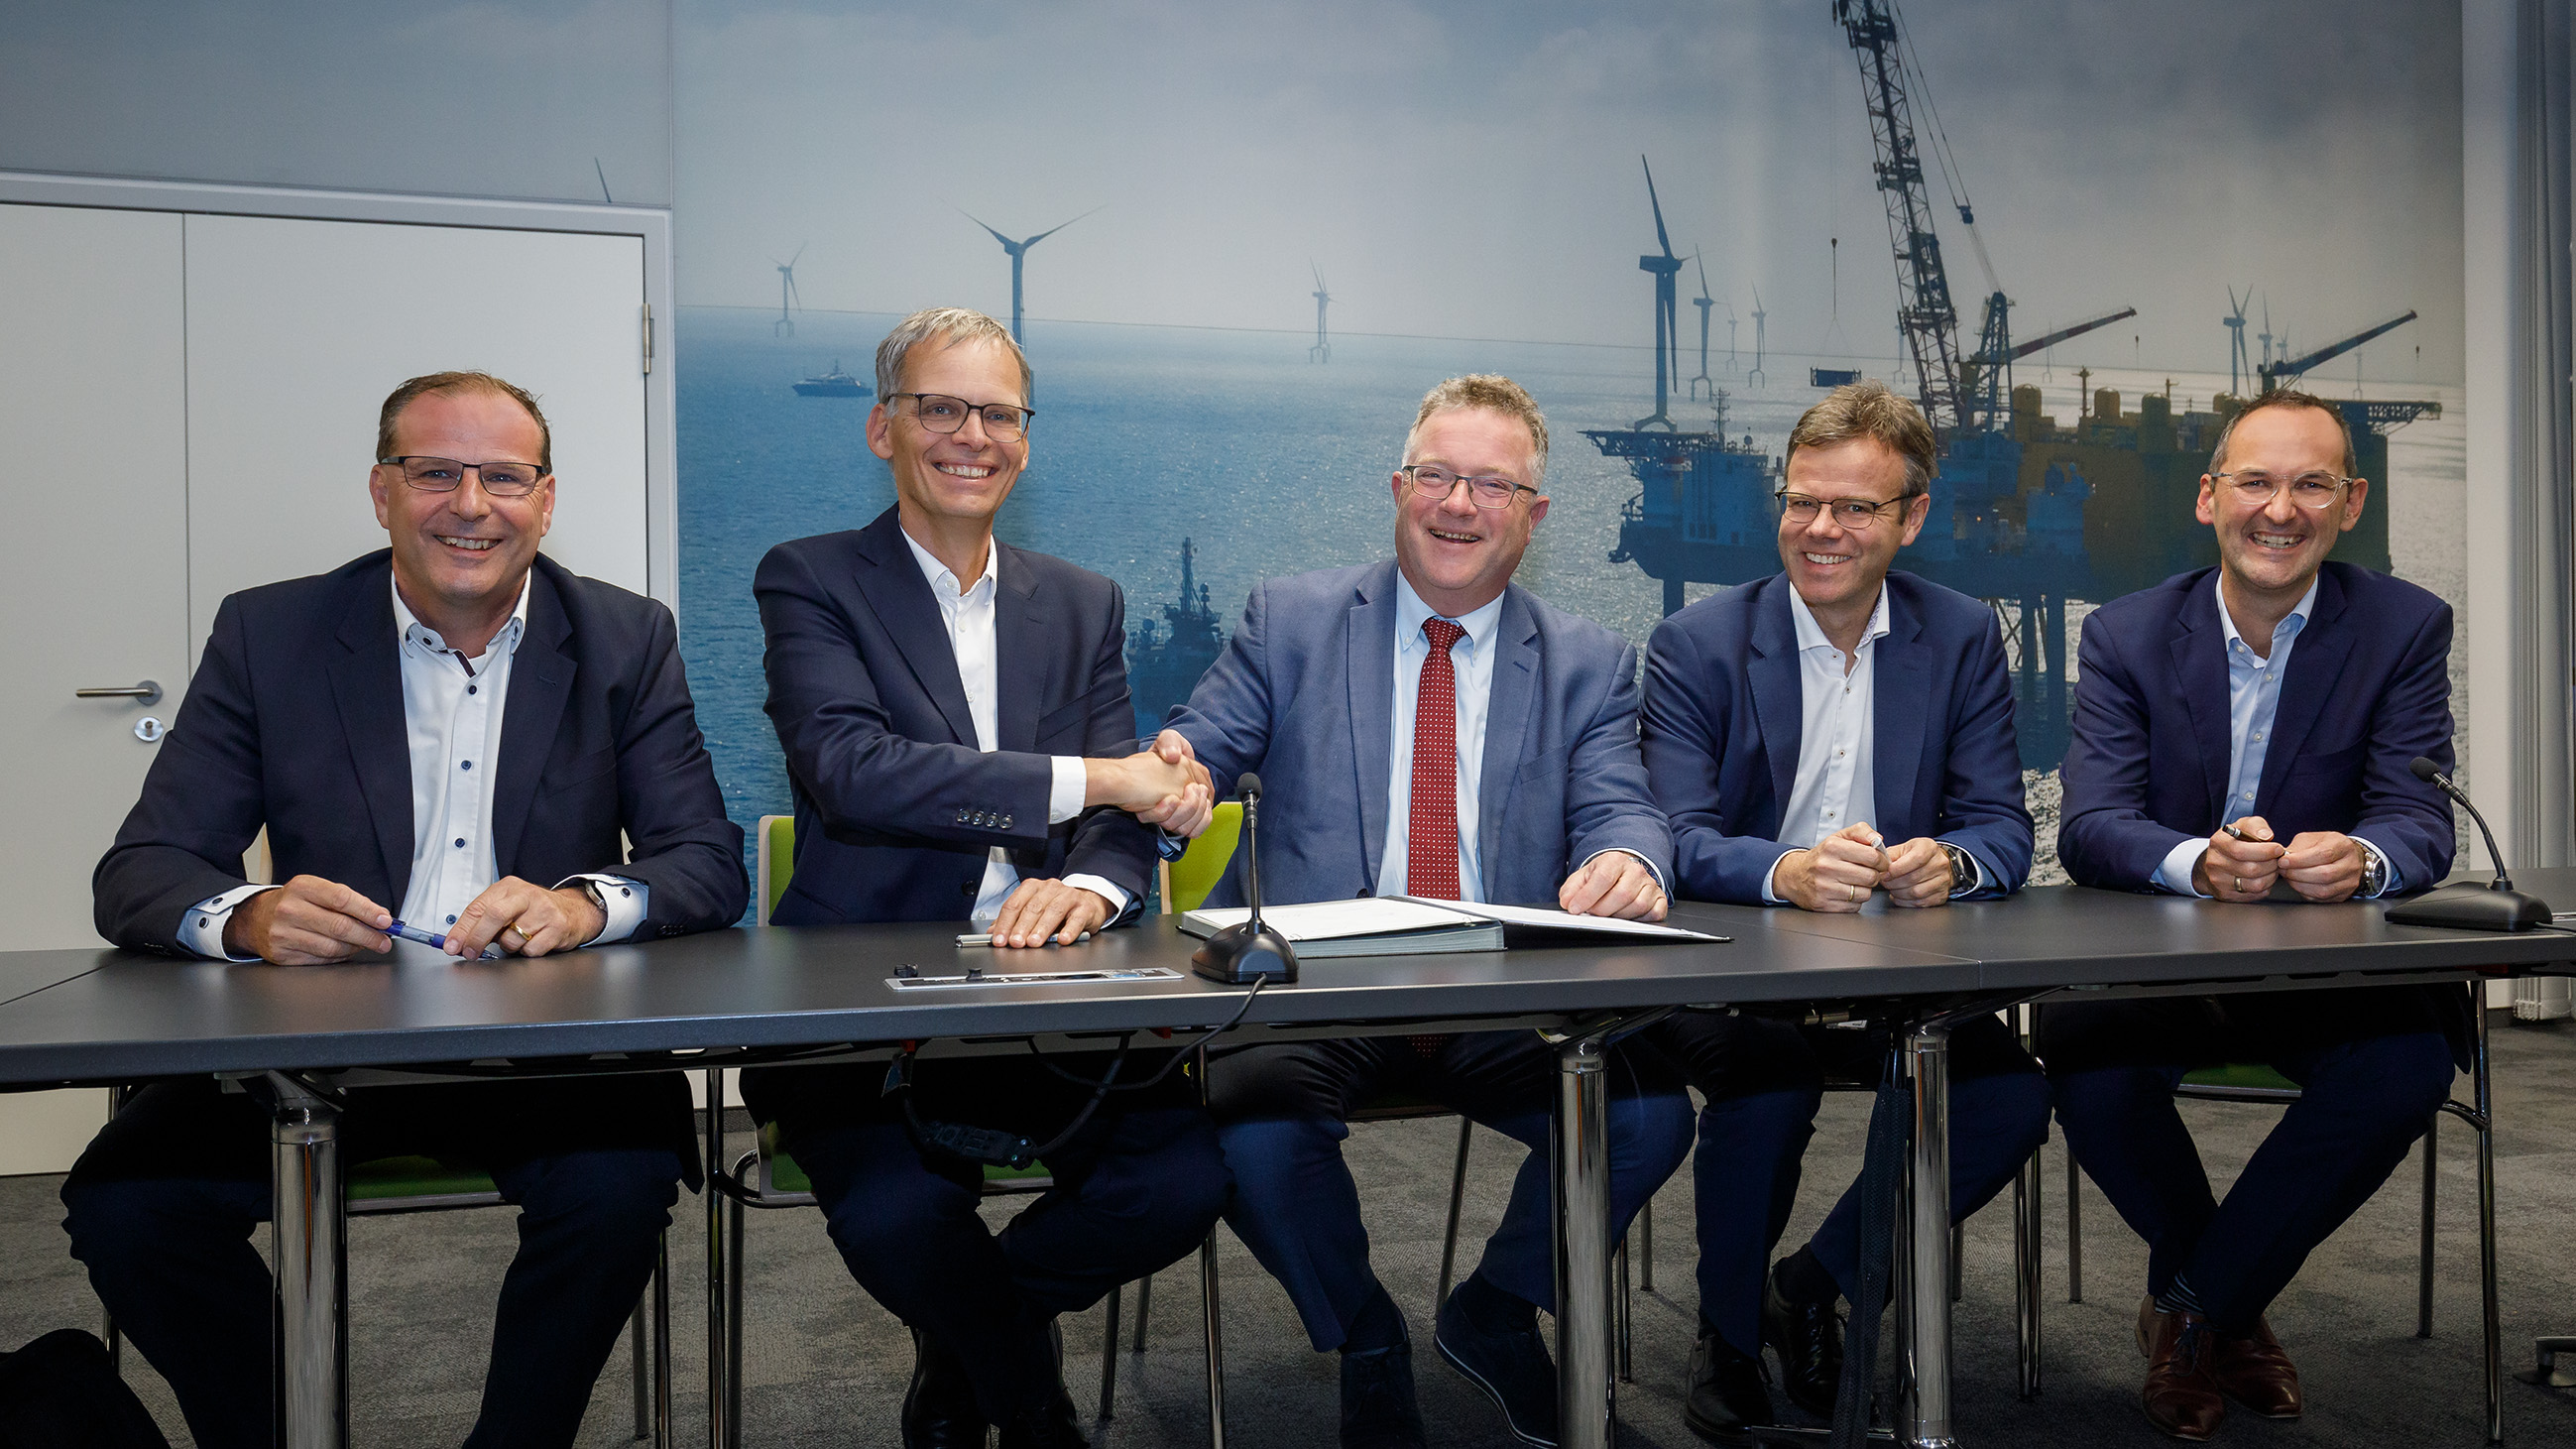 Hitachi Energy executives signing a deal to provide world’s first SF6-free 420 kV gas-insulated switchgear technology at TenneT’s grid connection in Germany